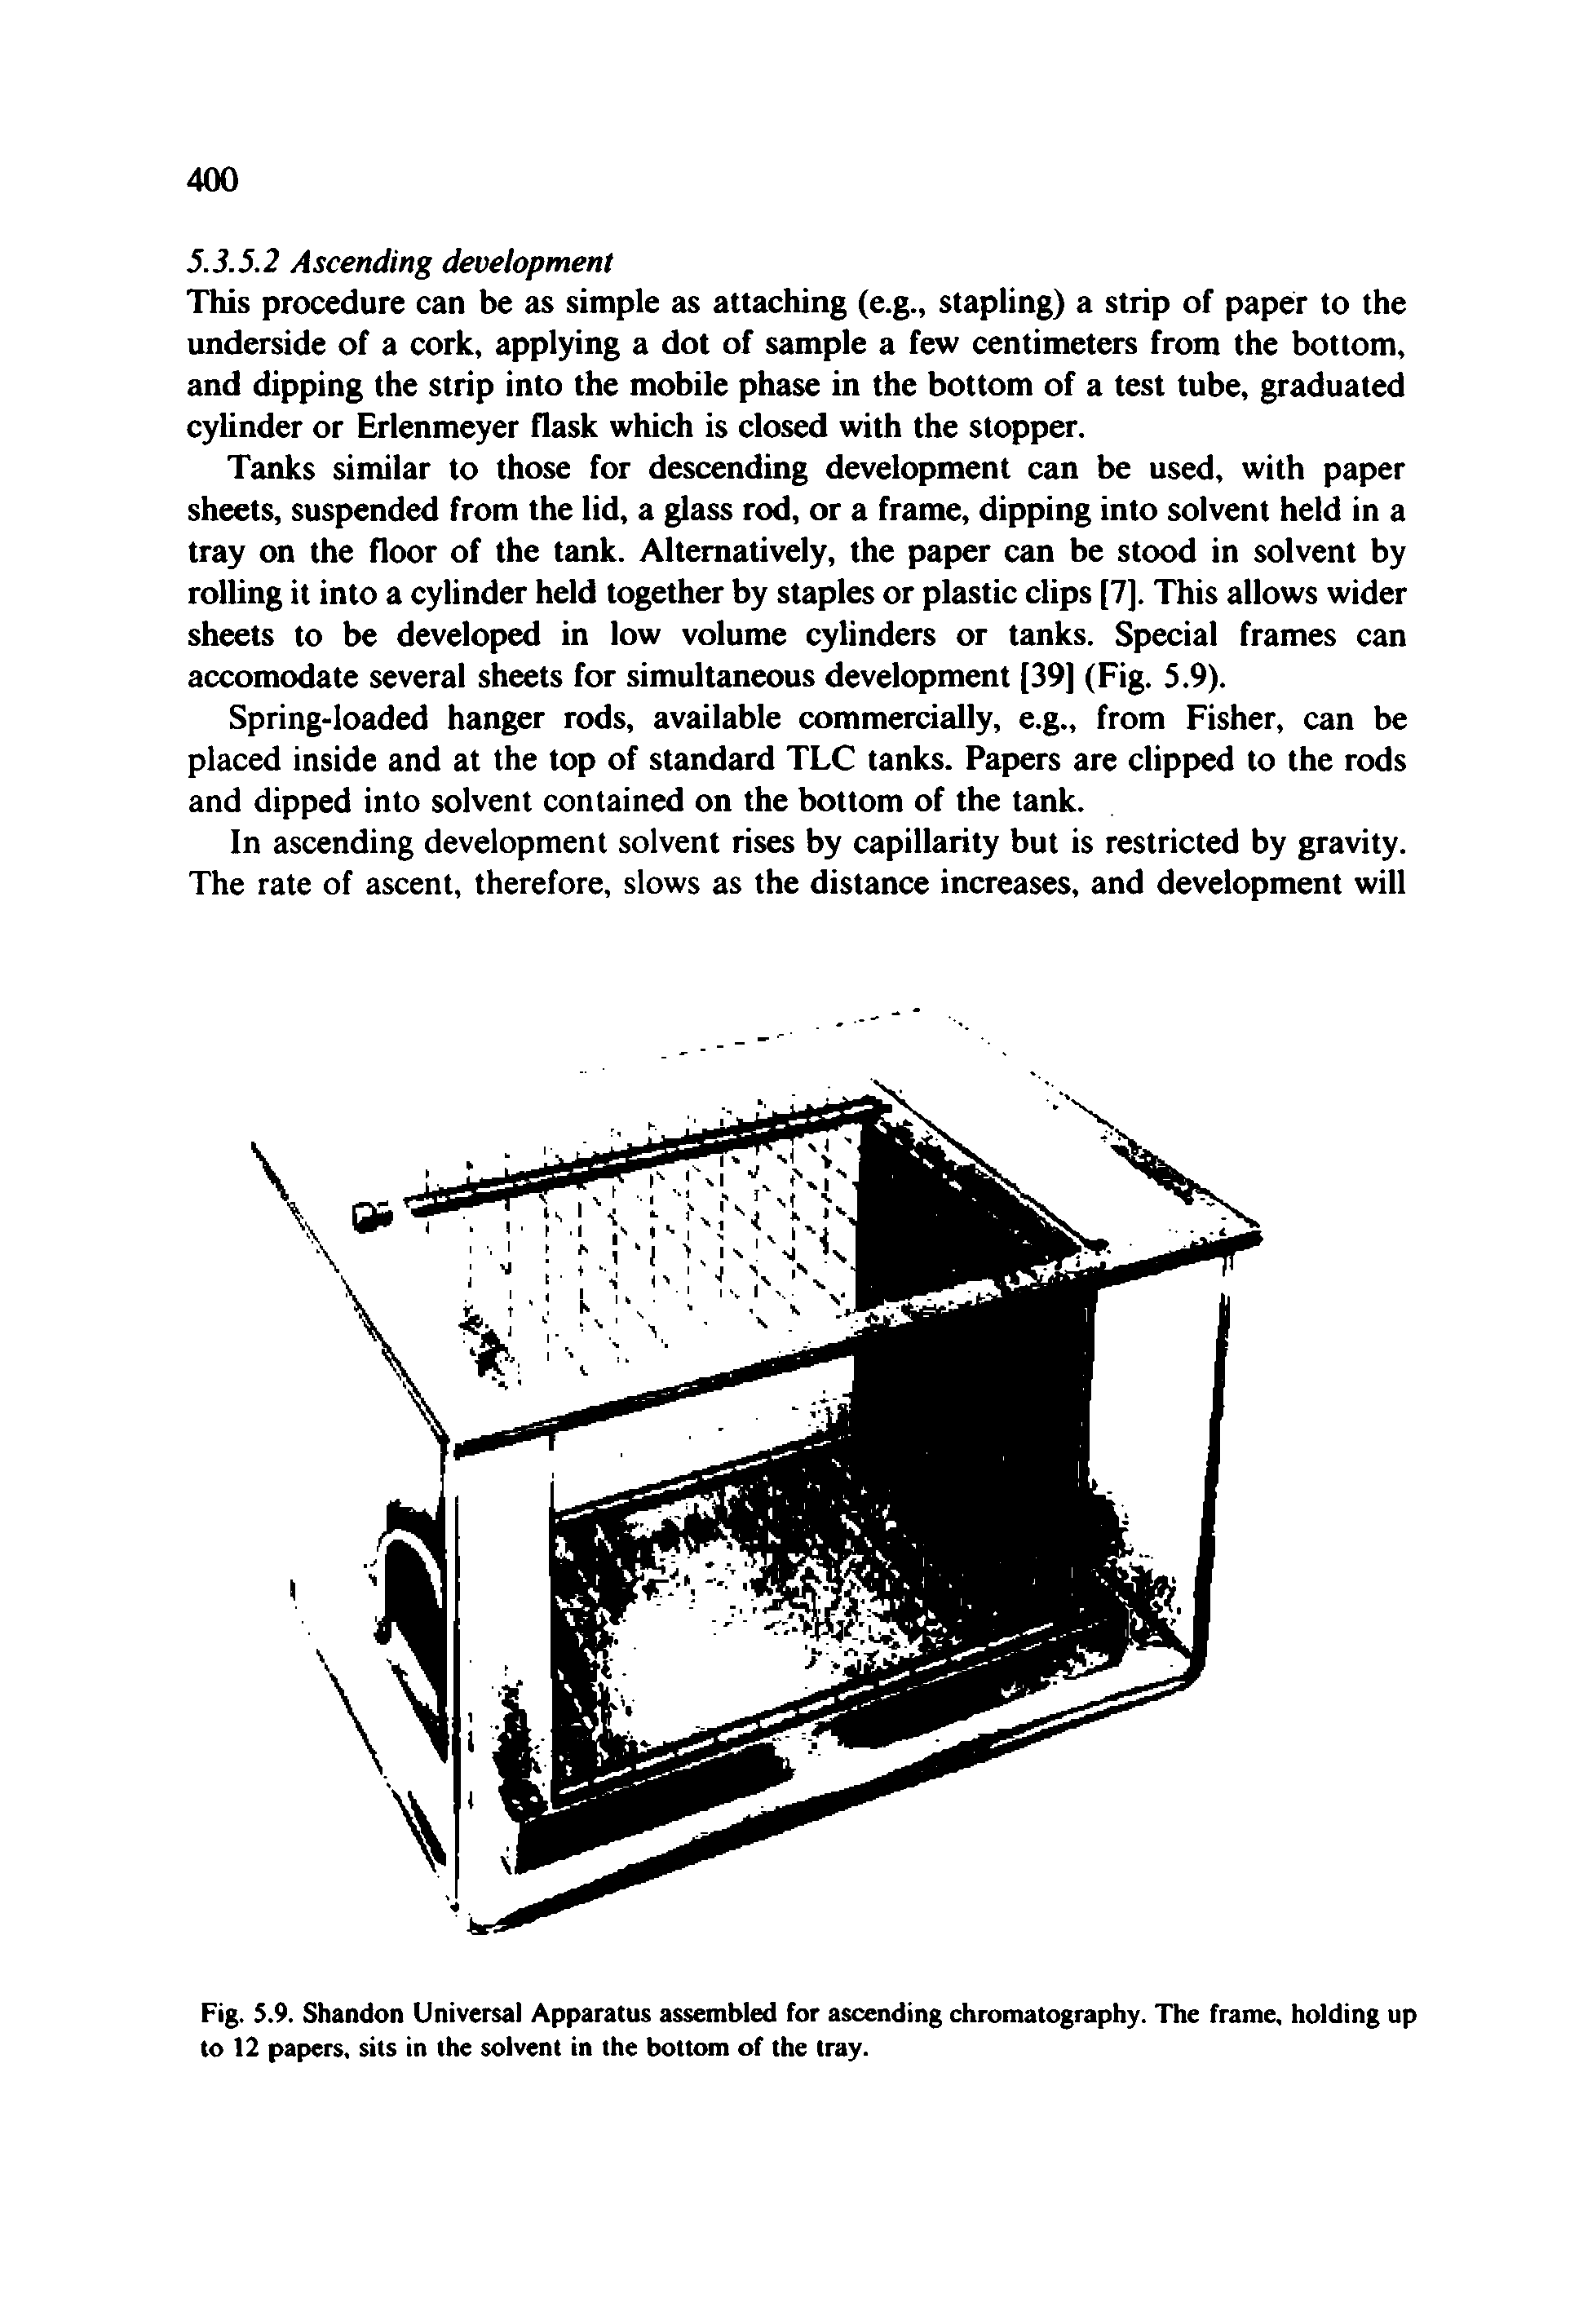 Fig. 5.9. Shandon Universal Apparatus assembled for ascending chromatography. The frame, holding up to 12 papers, sits in the solvent in the bottom of the tray.